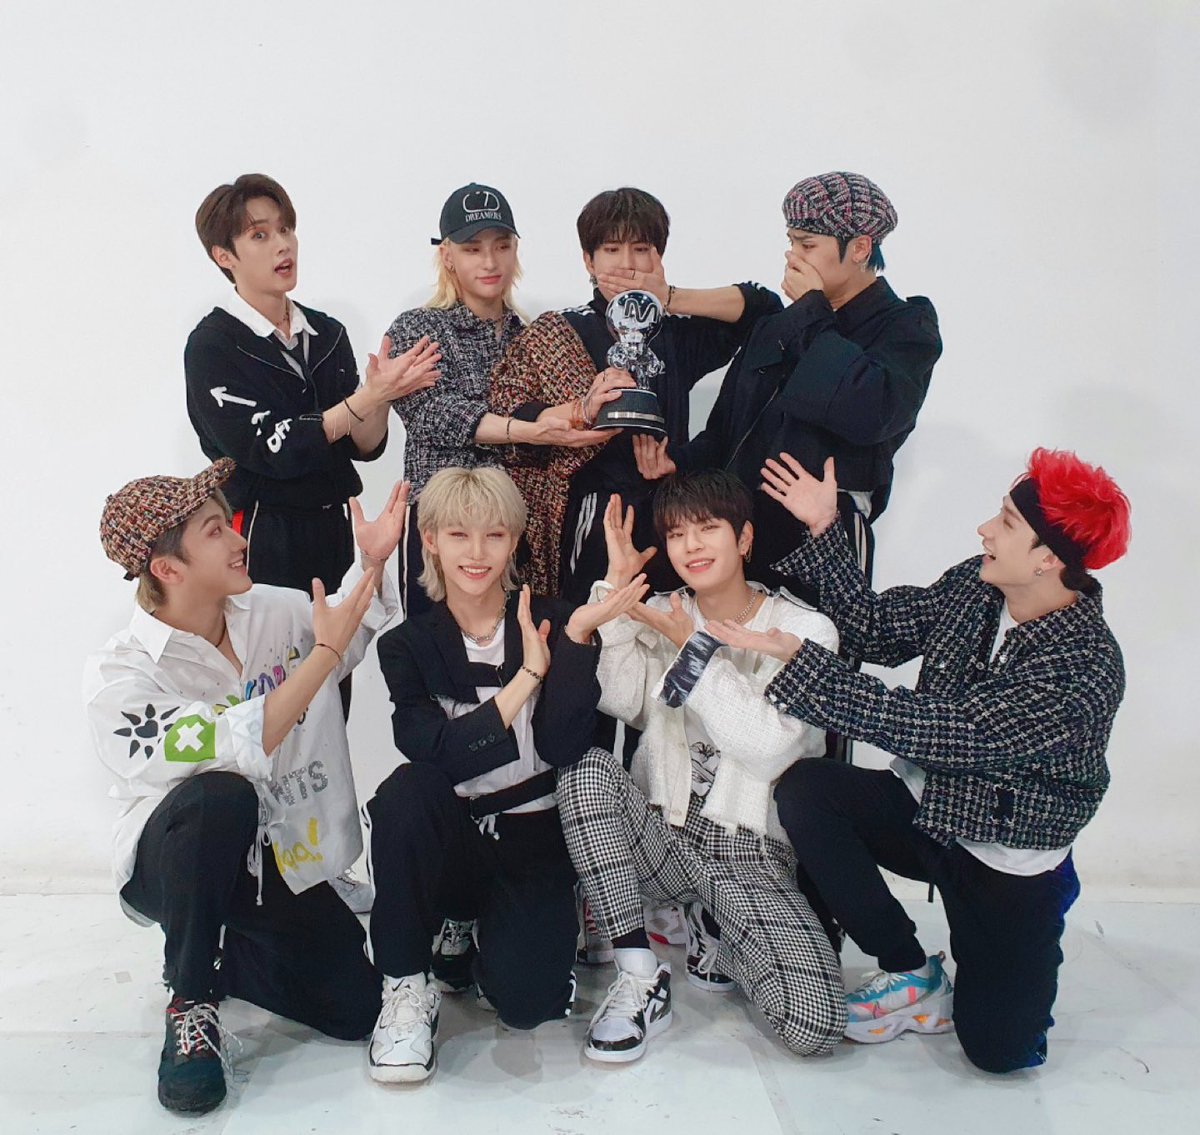 day 268 you got your fourth win you’re really taking over the world i really hope we can get your fifth win tomorrow    stray kids world domination @Stray_Kids  #StrayKids  #IN生  #INLIFE